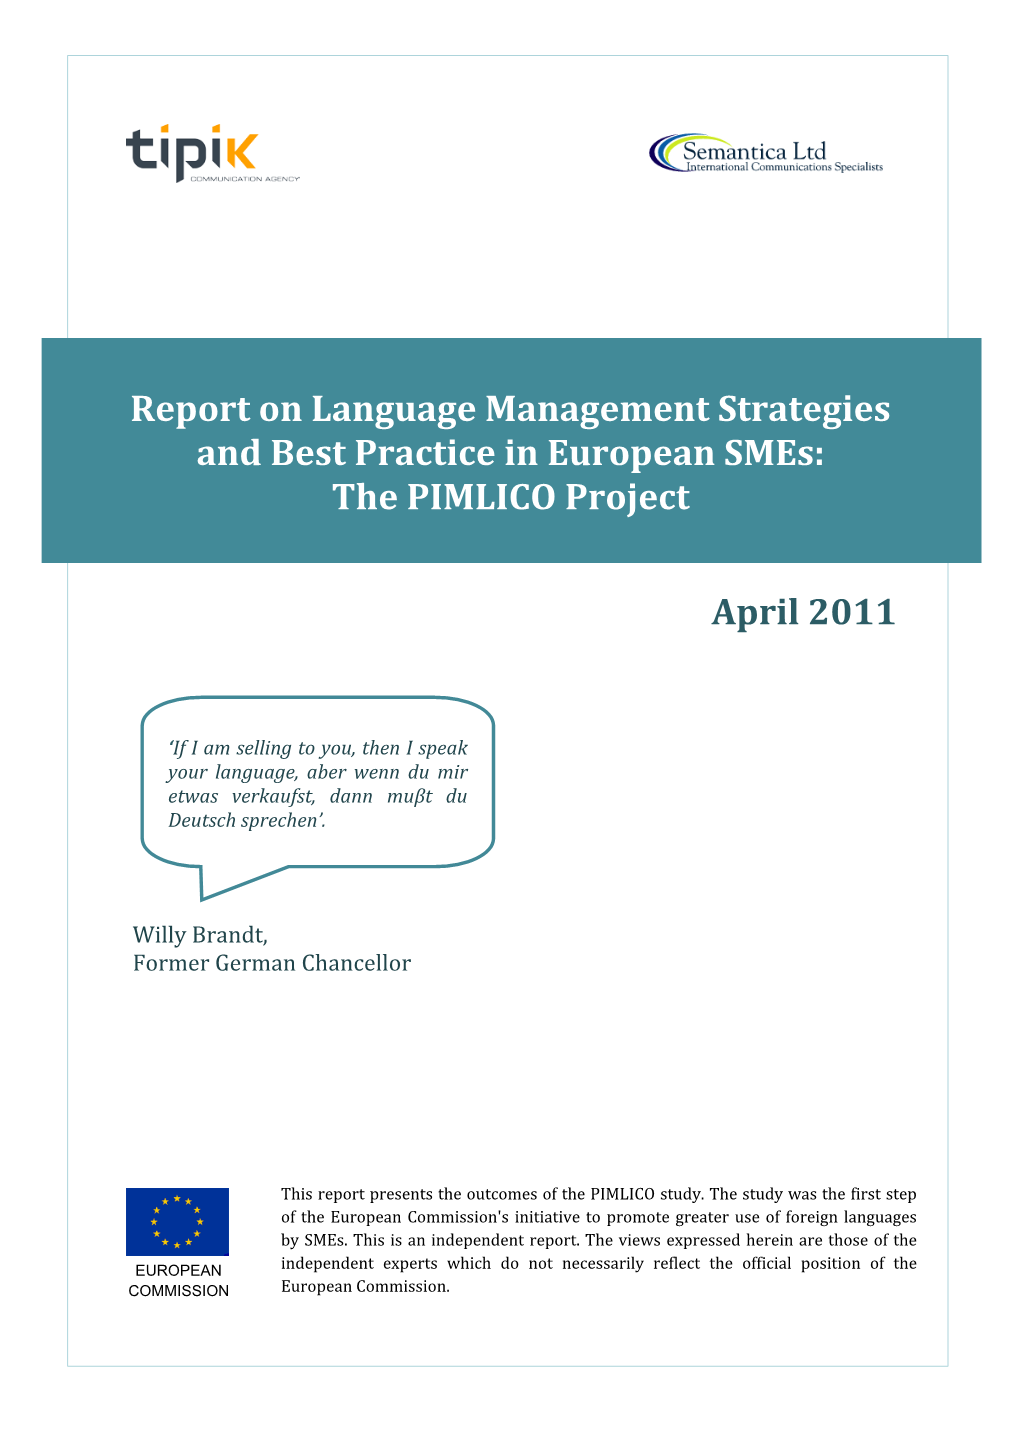 Report on Language Management Strategies and Best Practice in European Smes: the PIMLICO Project